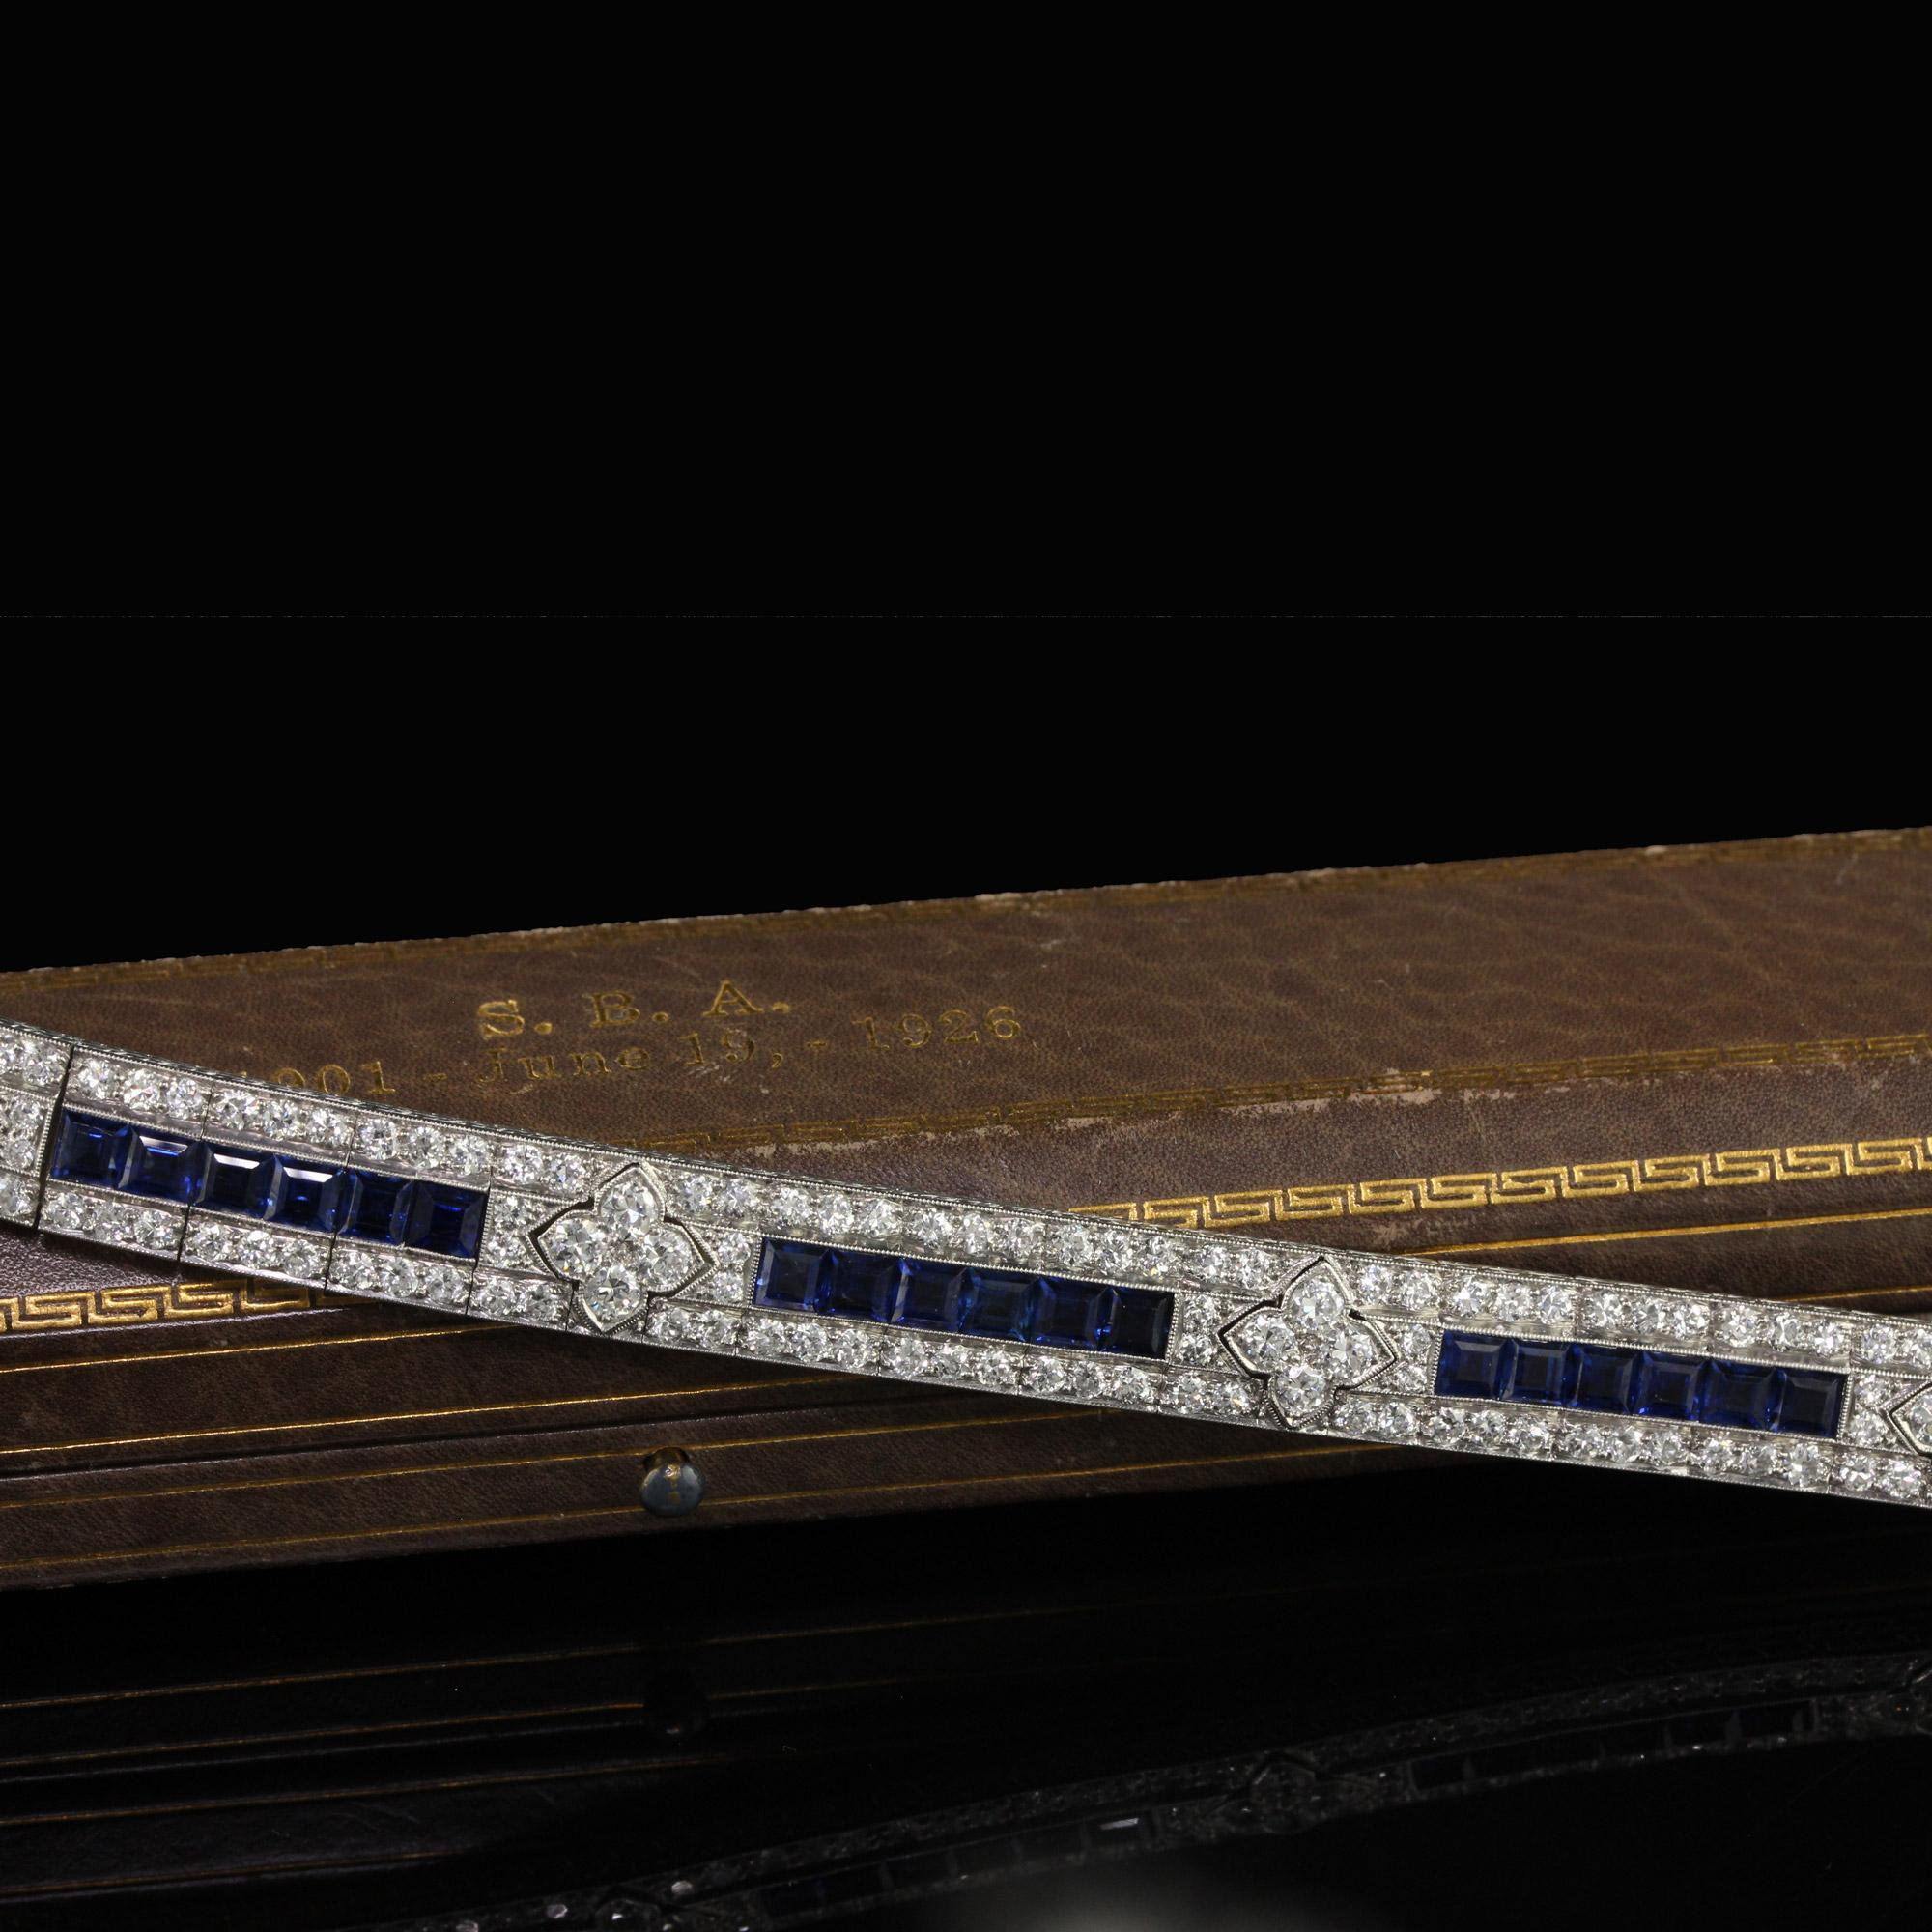 Antique Art Deco Raymond Yard Old Euro Diamond and Sapphire Bracelet - GIA In Good Condition For Sale In Great Neck, NY